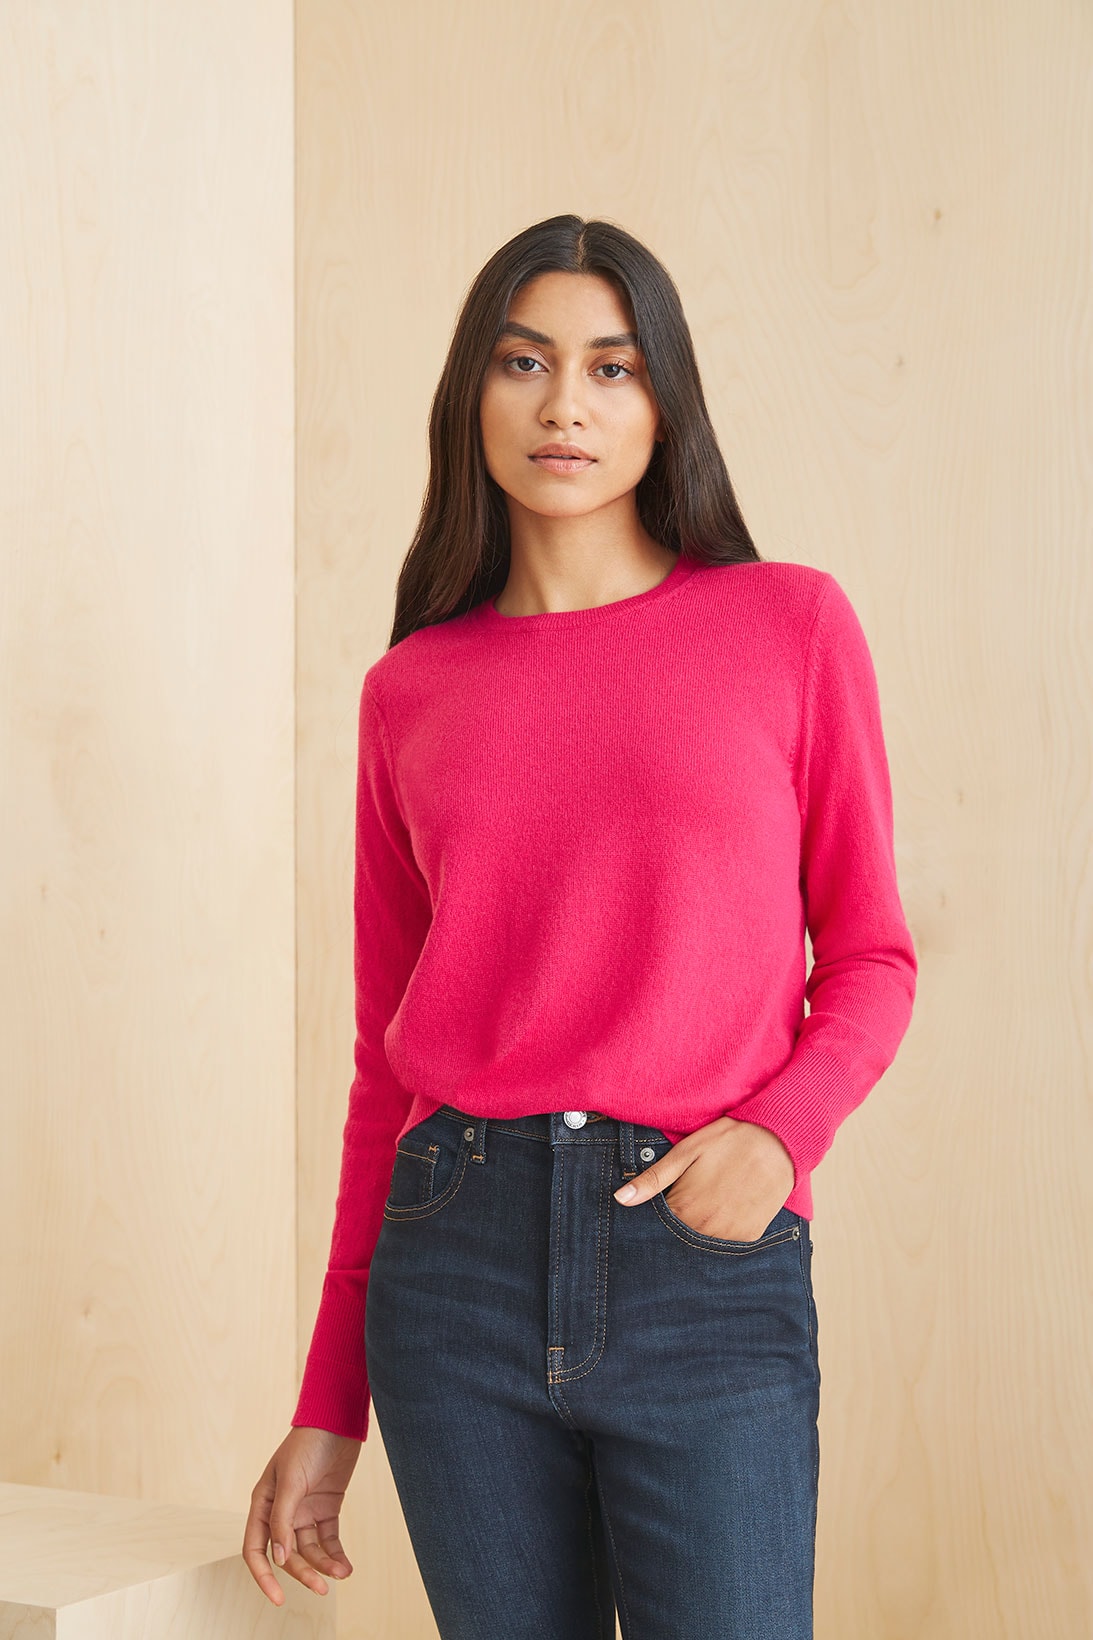 everlane pop in at nordstrom sustainability silk cashmere sweaters denim jackets shirts coats outerwear shoes